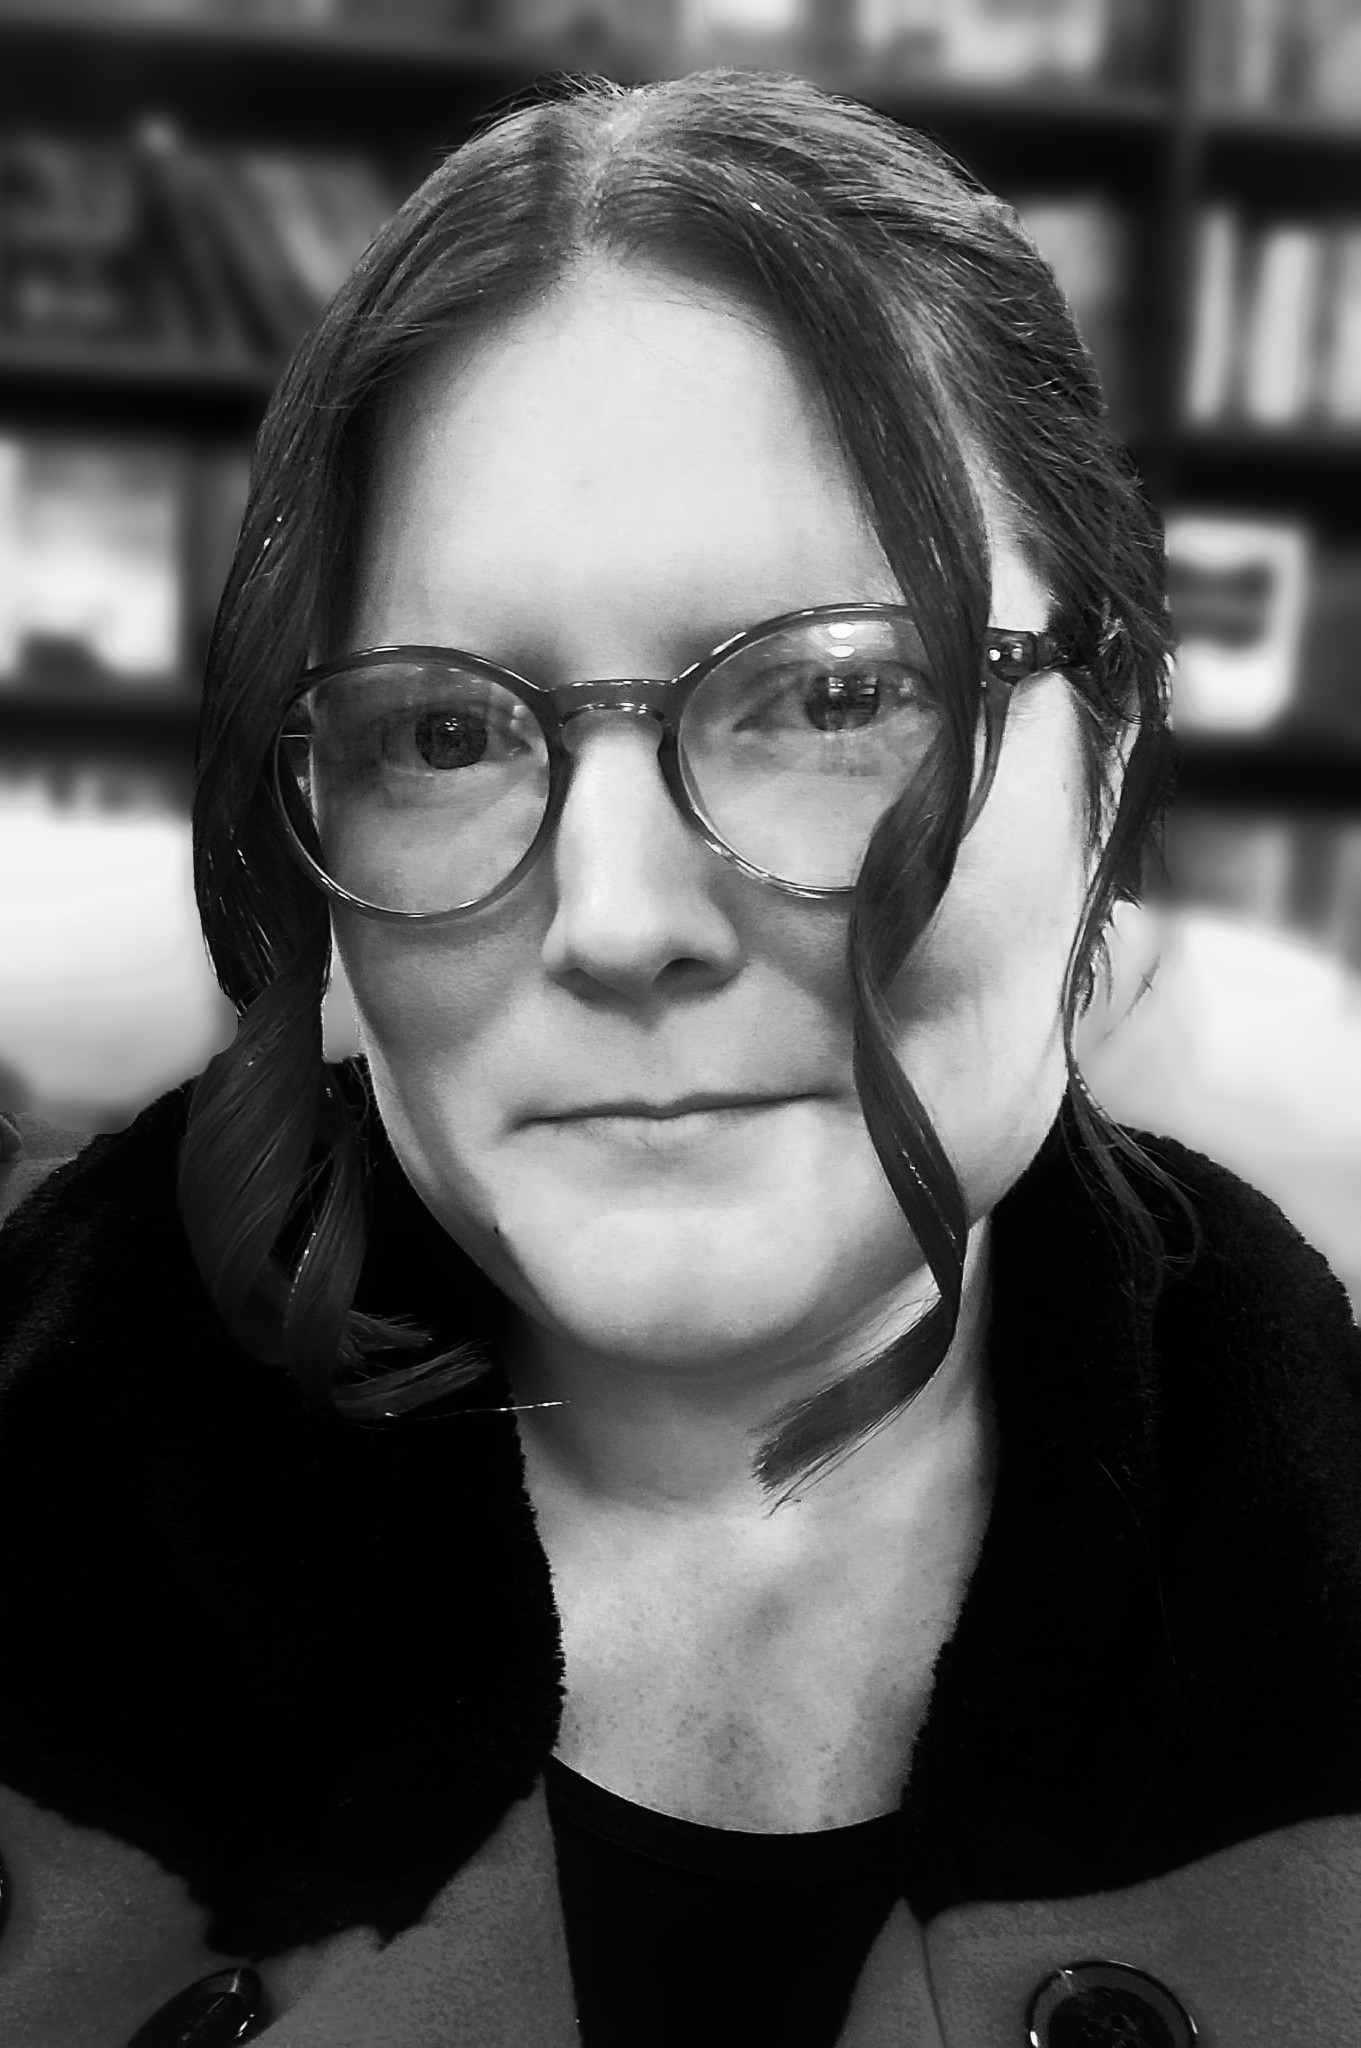 This black and white photo features Kim, a thirty-something year old Caucasian woman. She is wearing glasses, a coat with a dark, wide collar, and has her dark hair pulled back with two pieces hanging loose on either side of her face that are slightly curled. Her head is tilted slightly to the viewer's left and she has a neutral expression.